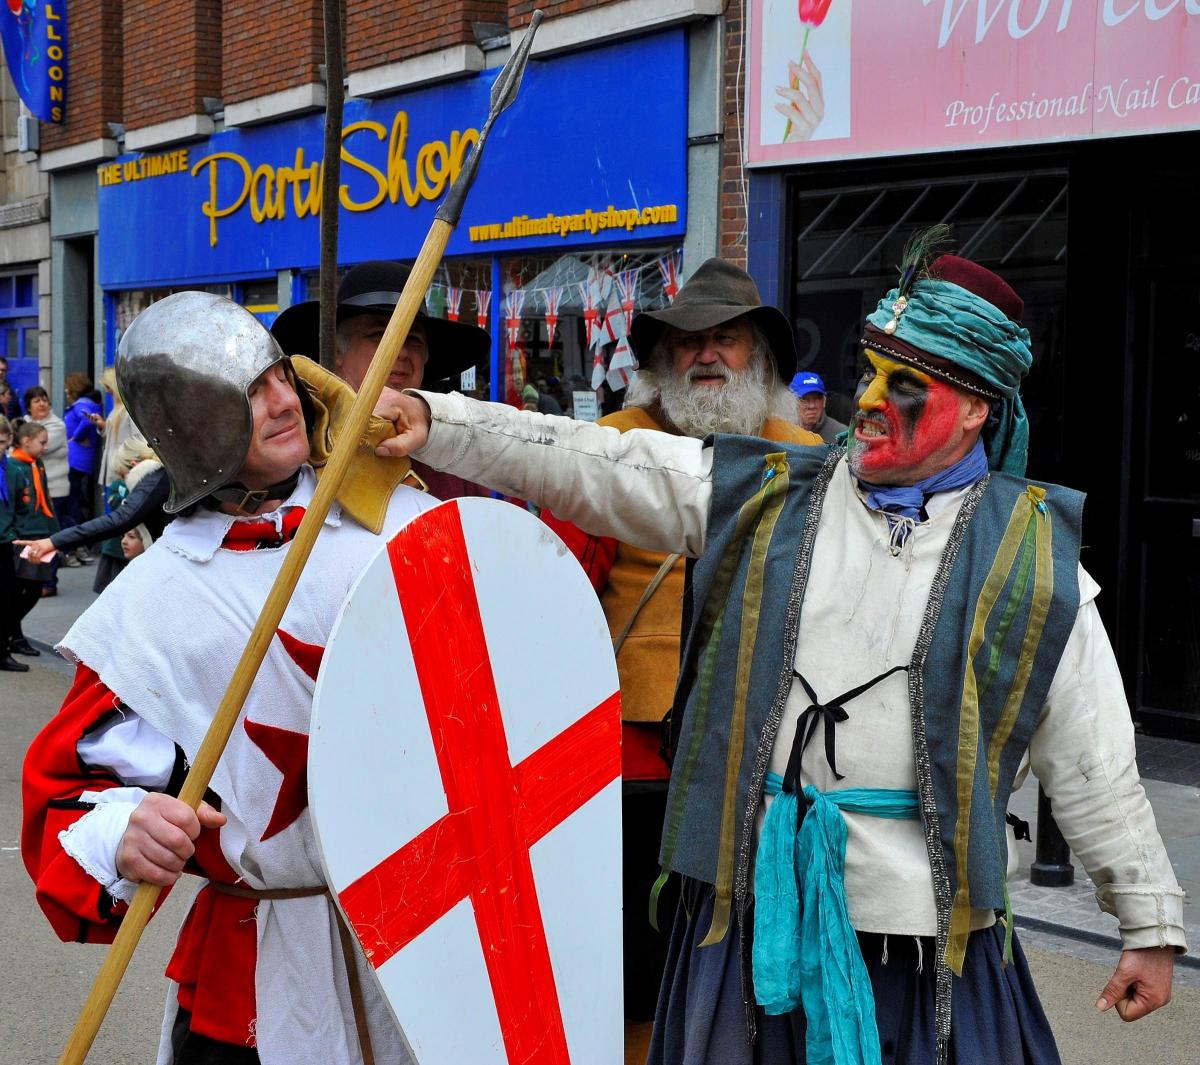 St George's Day parade